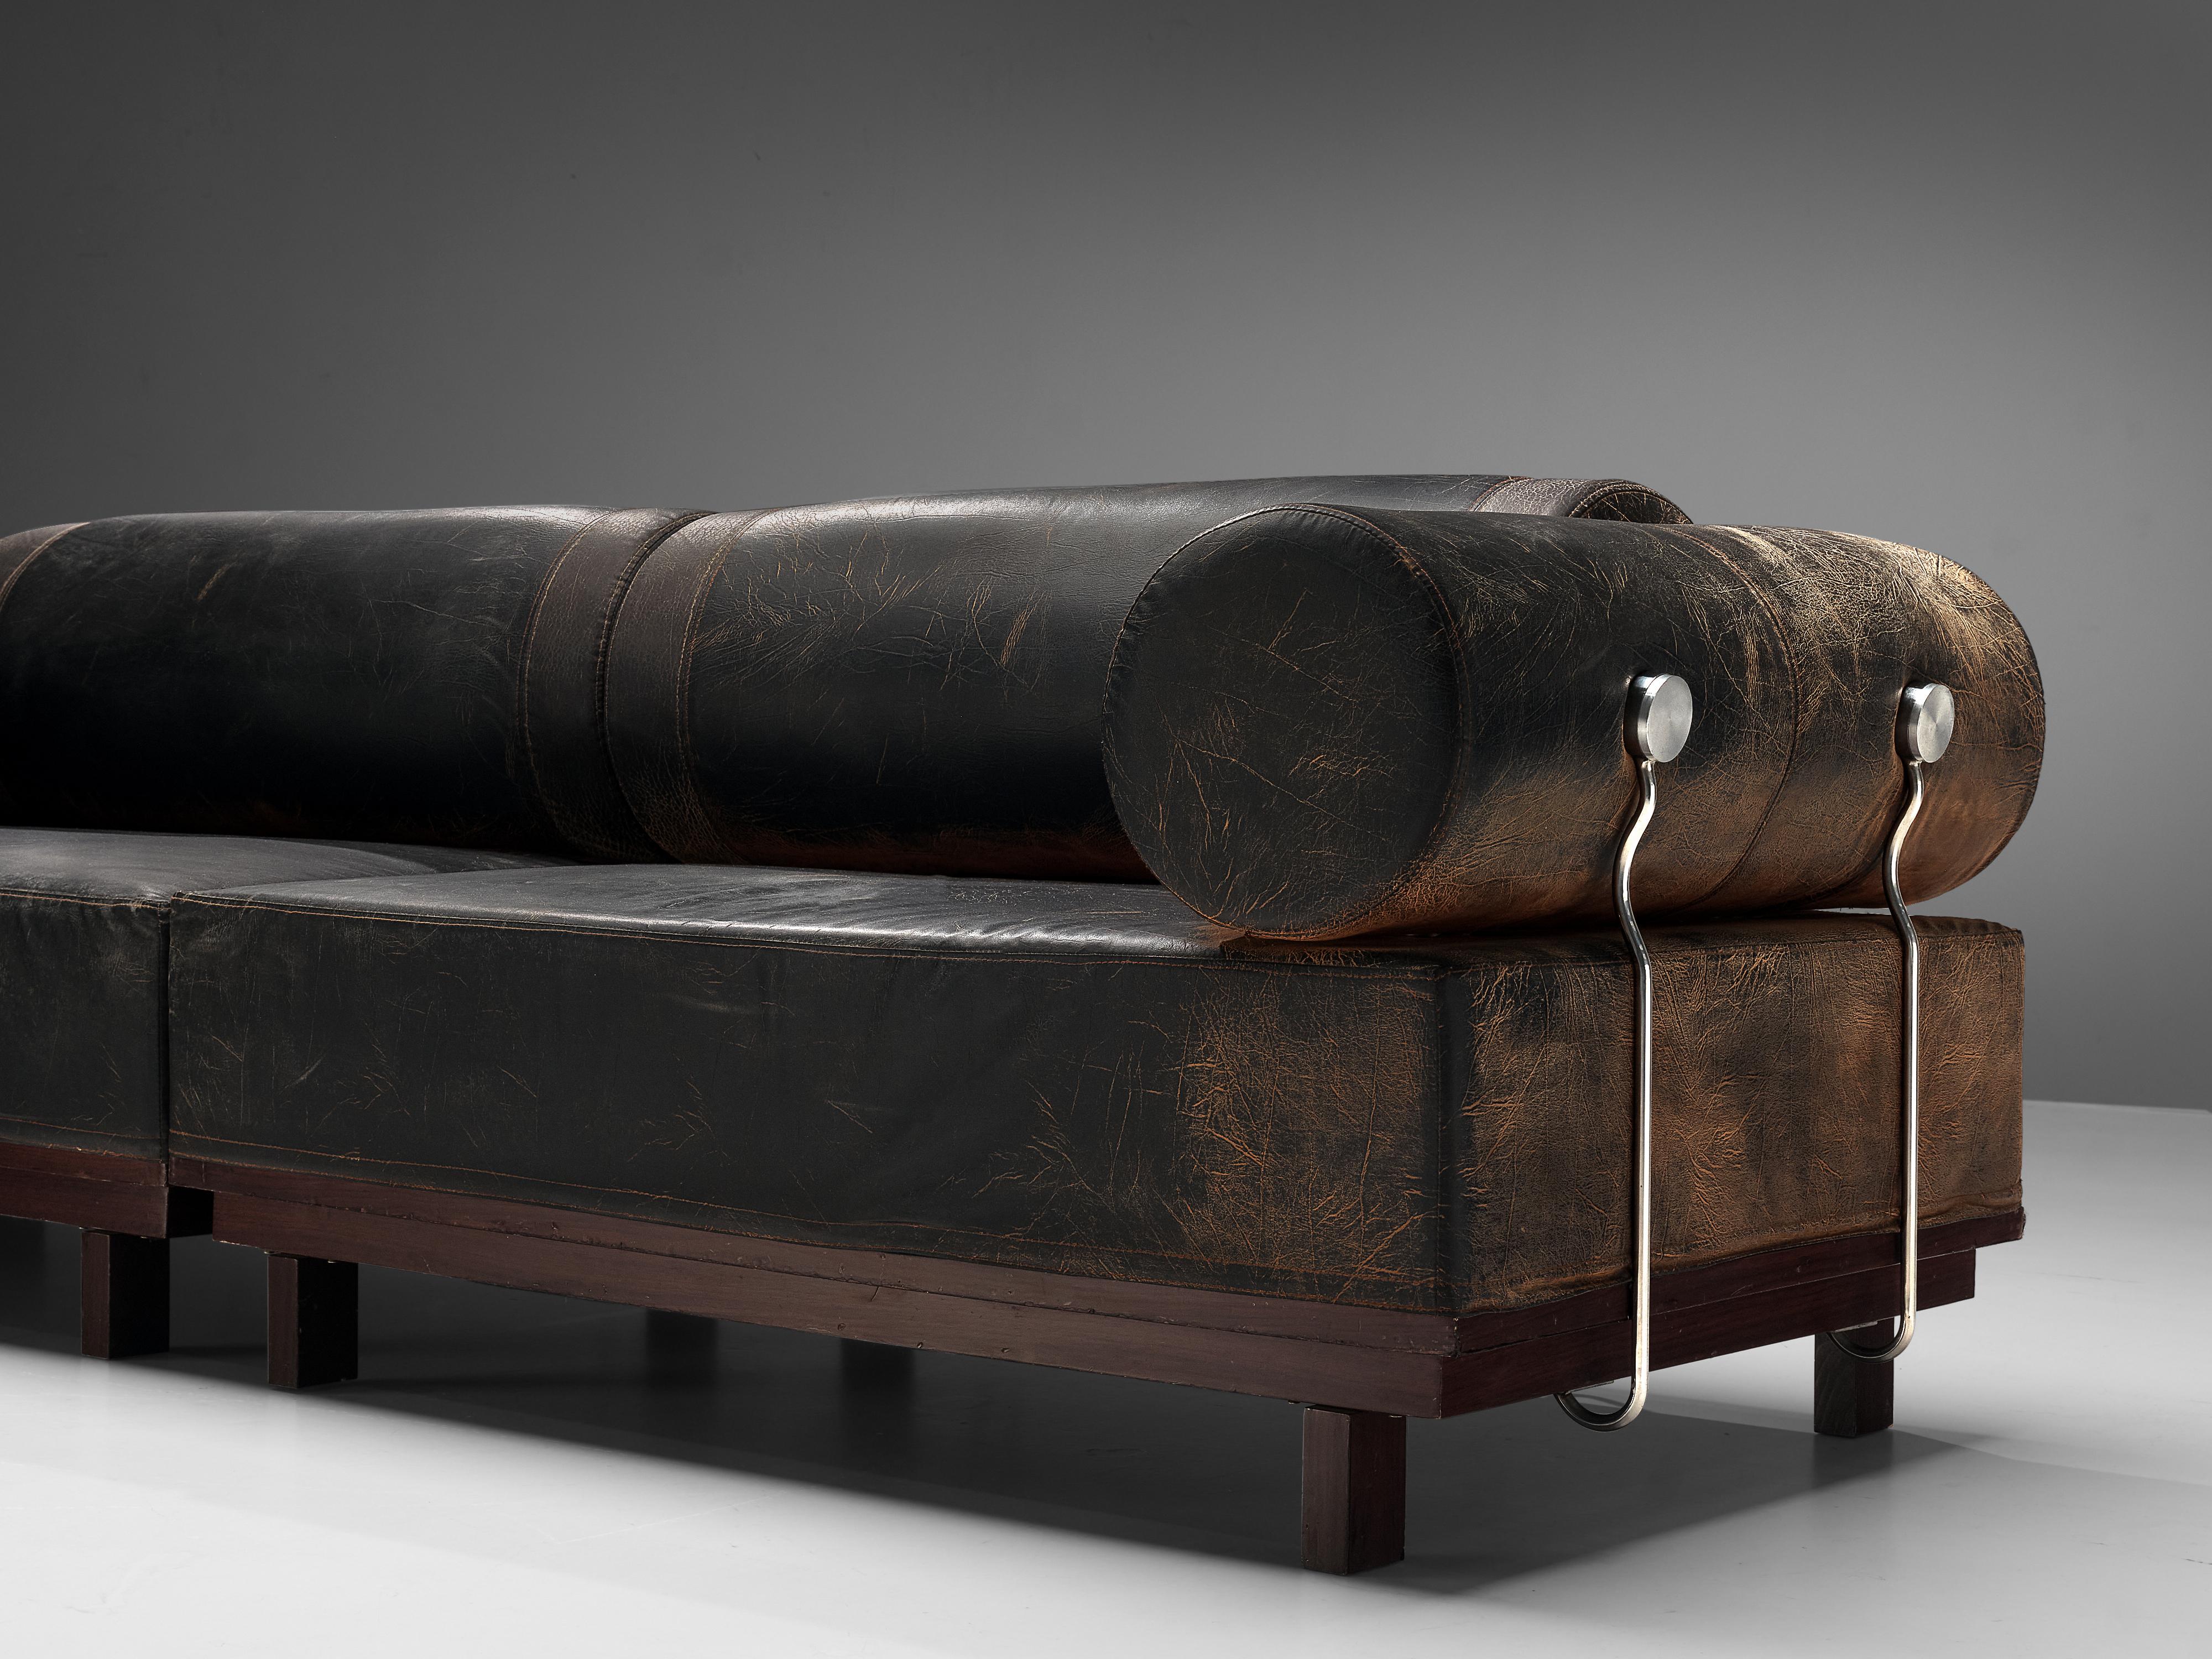 Bulky Modular Sofa in Leatherette and Metal Details 1